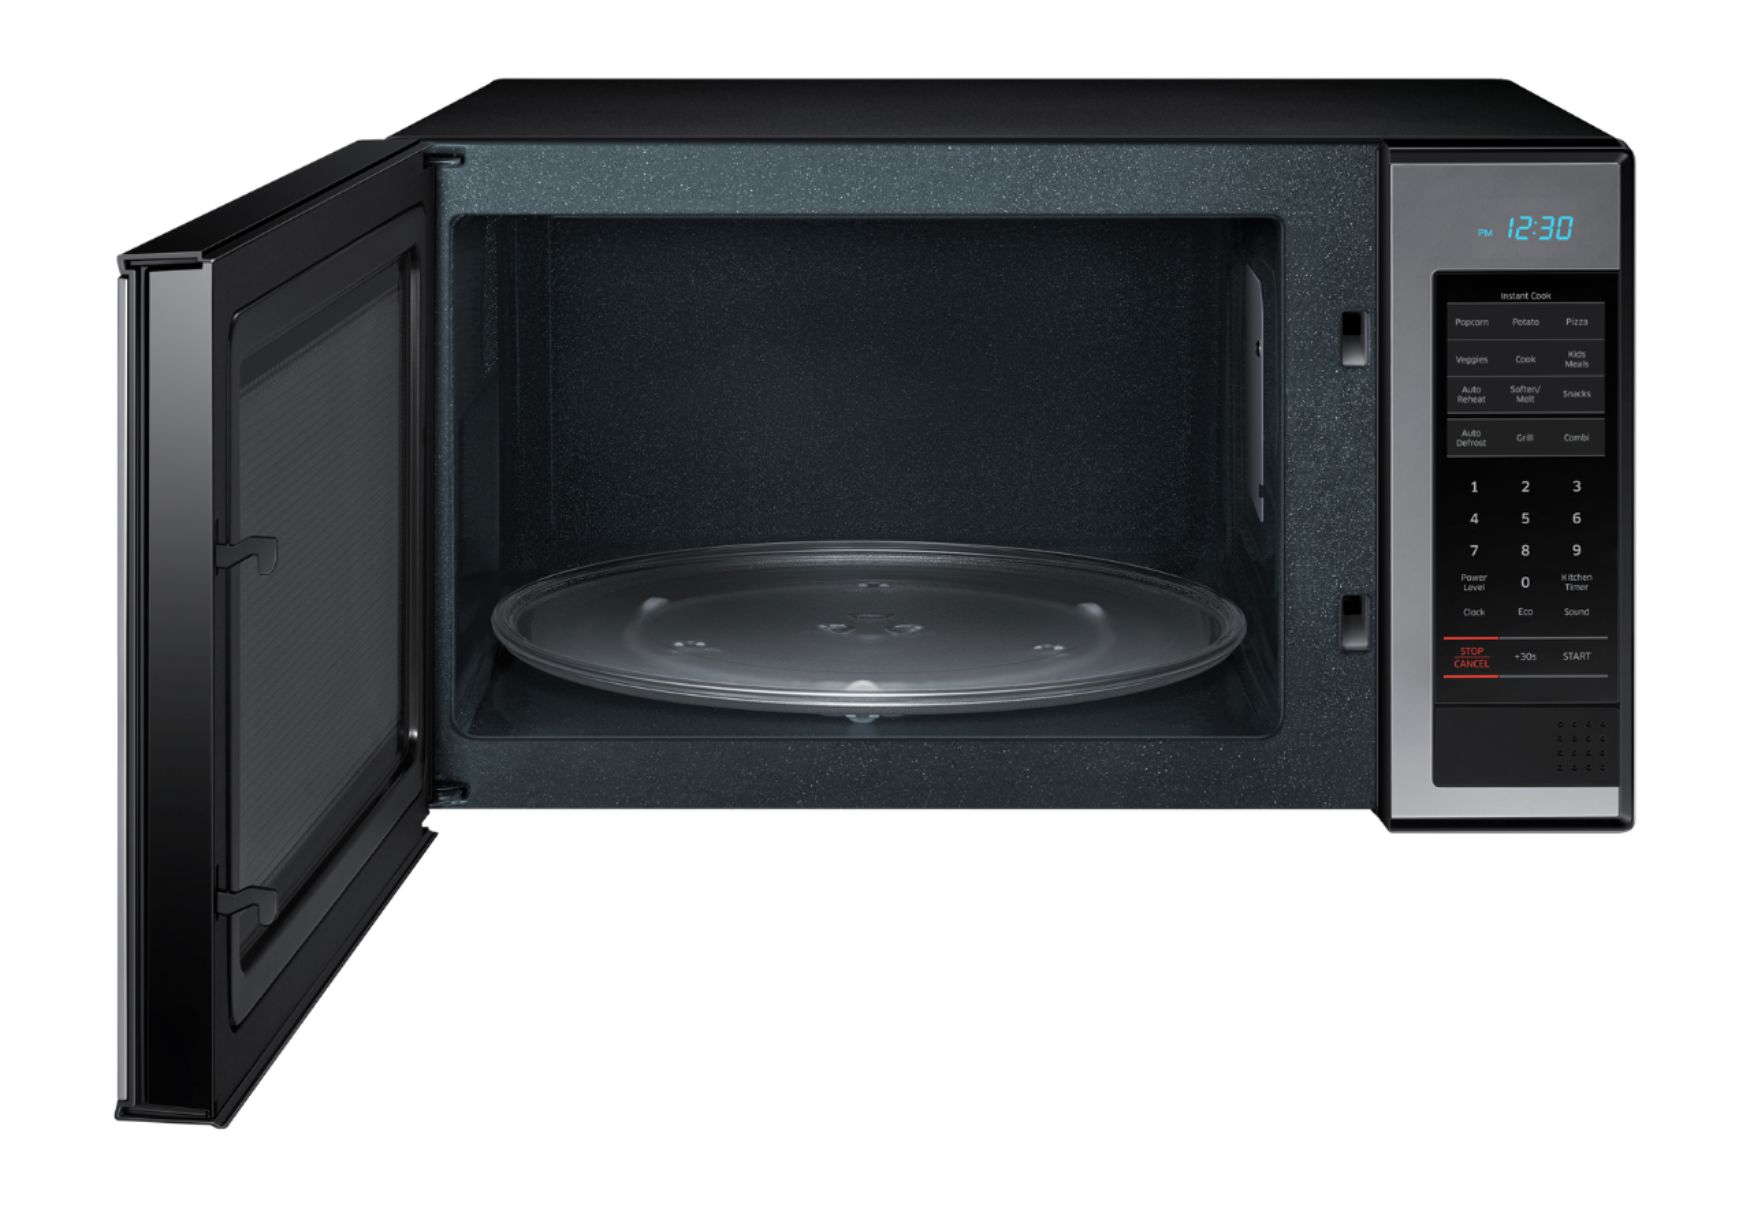 1.3 Cu. ft. Stainless Steel with Mirror Finish Microwave Oven with